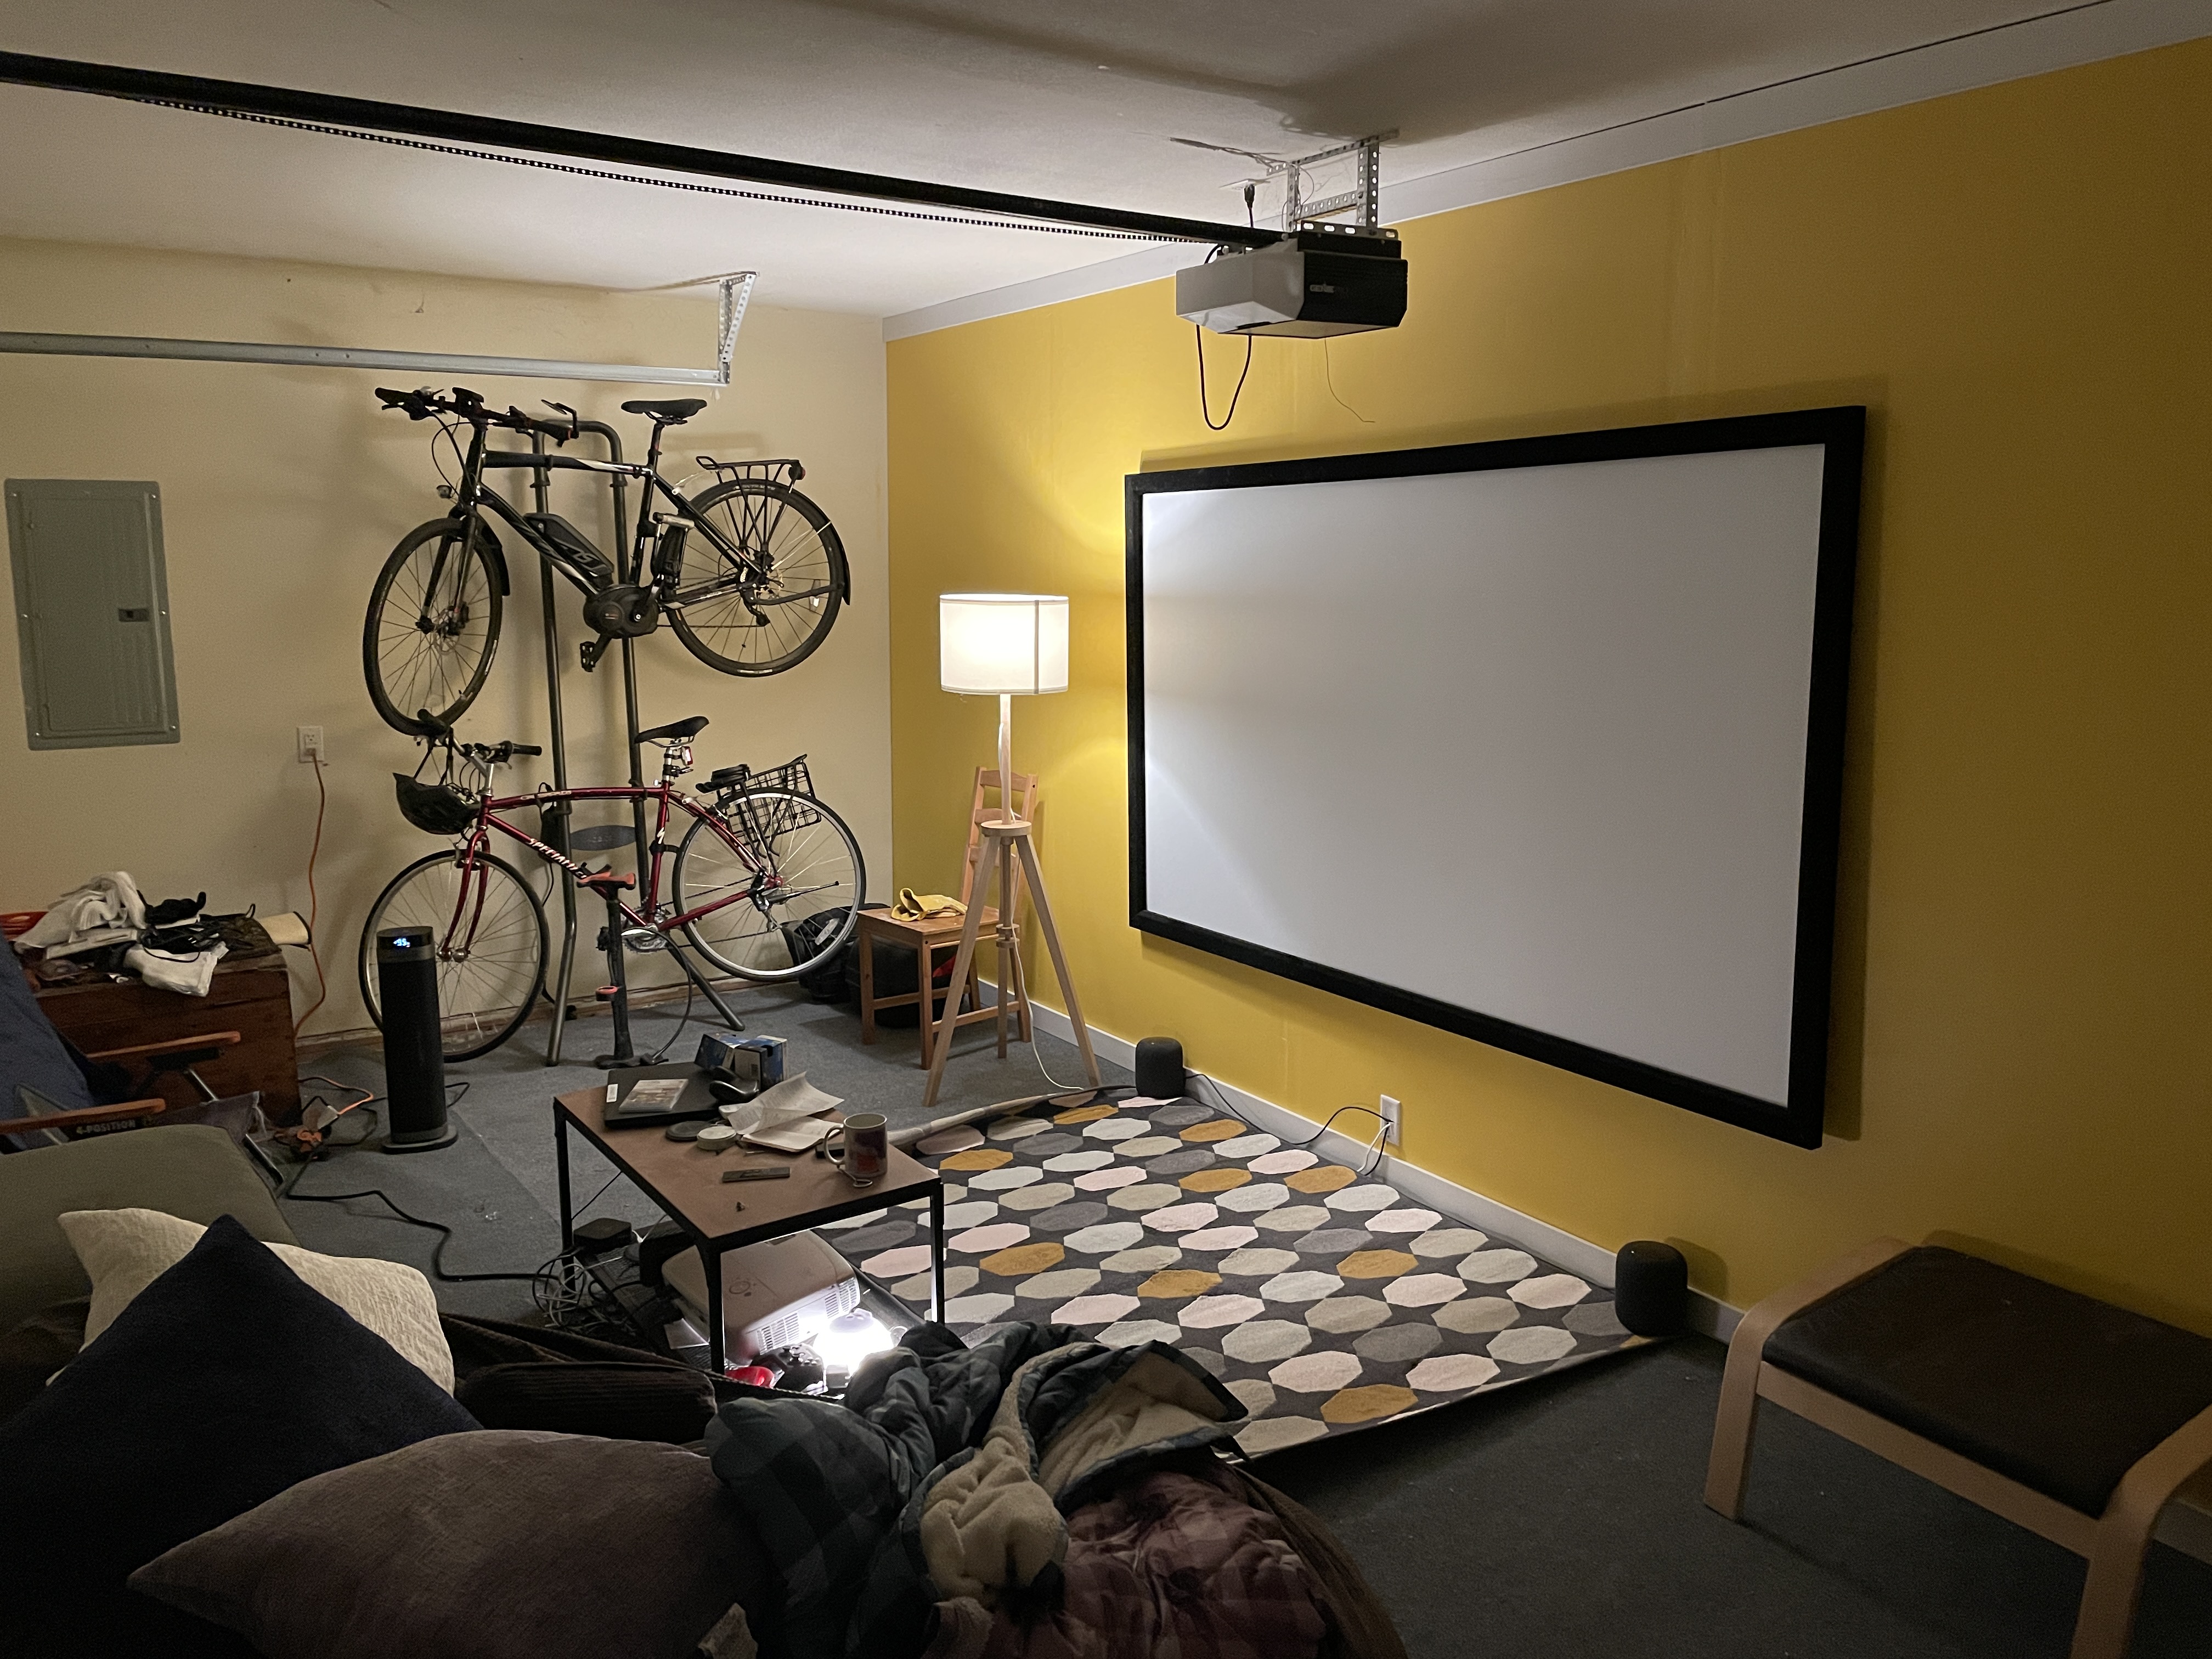 A projection movie screen in a remodeled garage